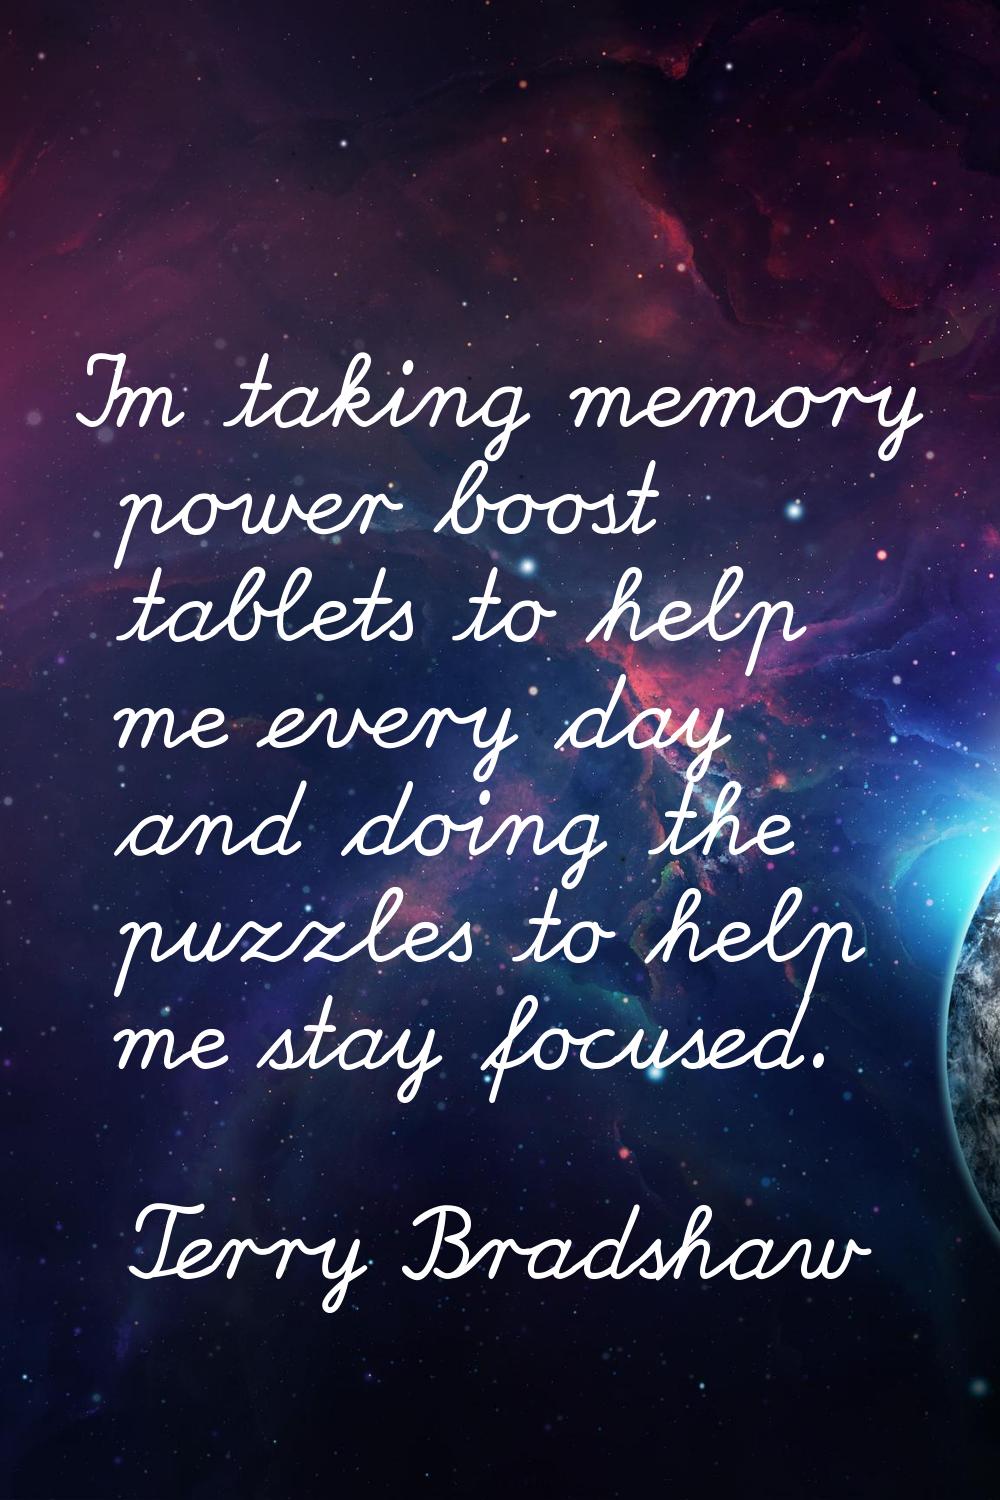 I'm taking memory power boost tablets to help me every day and doing the puzzles to help me stay fo